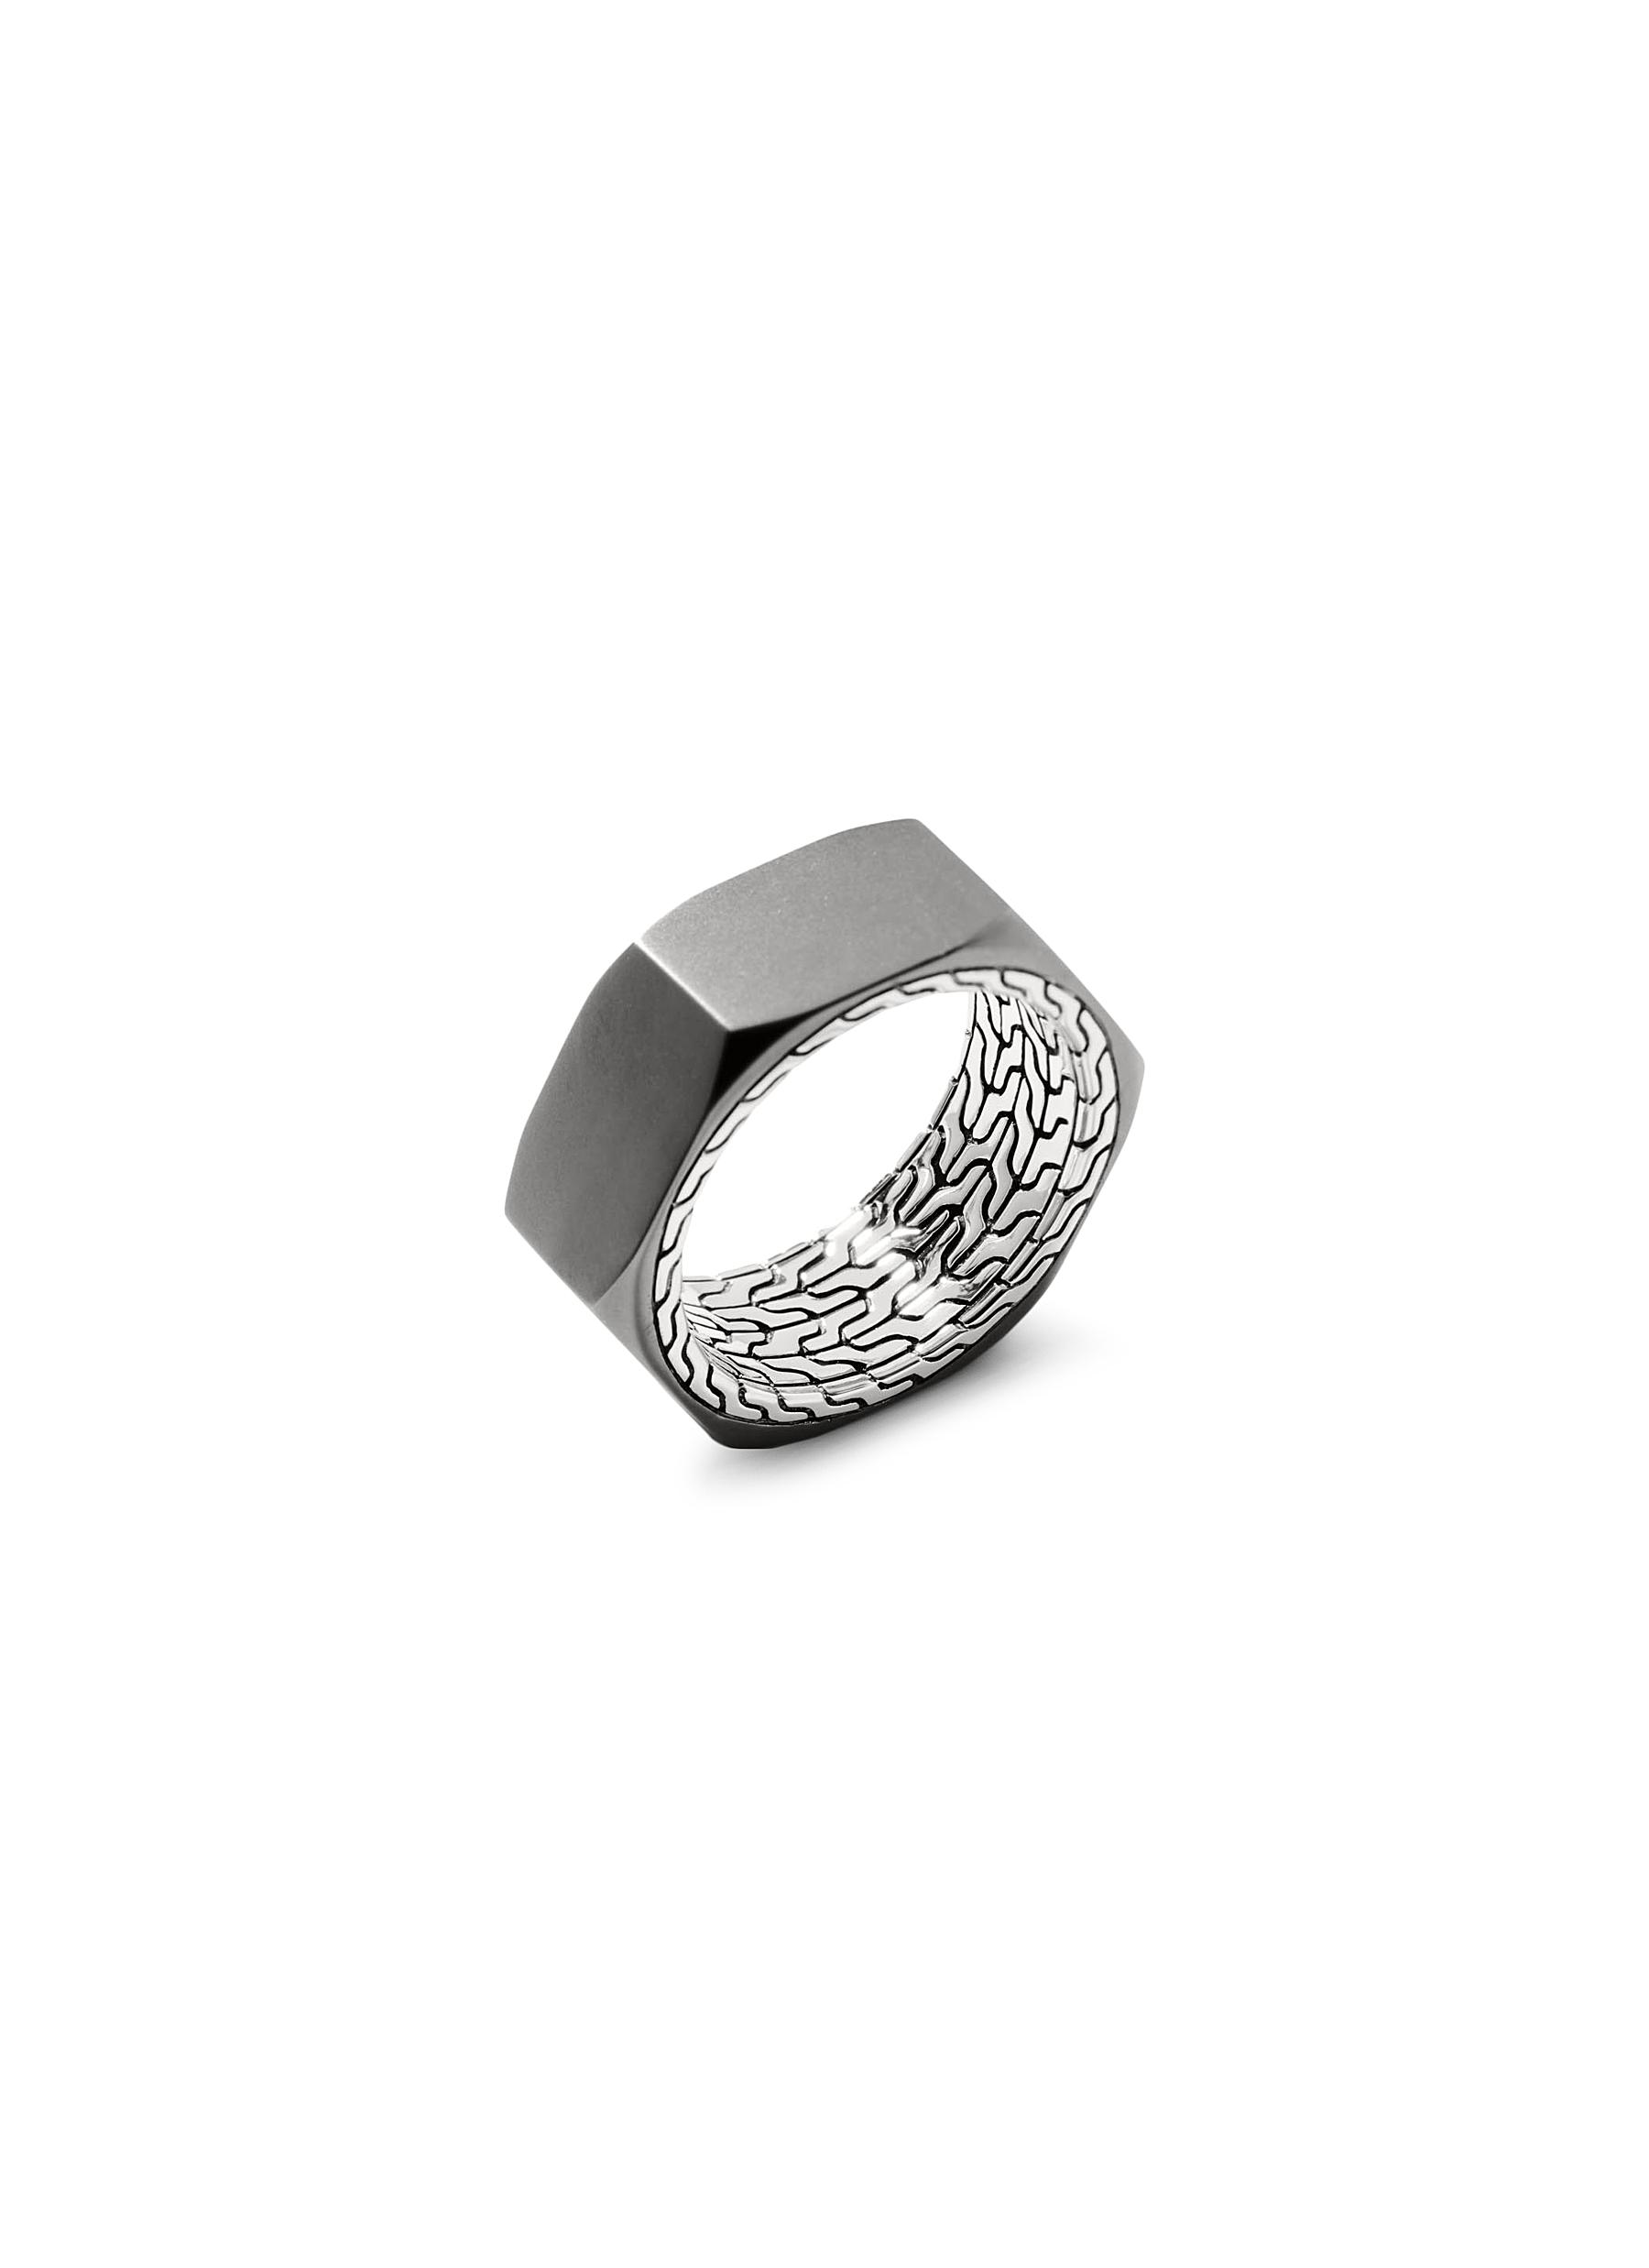 â€˜CLASSIC CHAIN’ BLACK RHODIUM PLATED STERLING SILVER INDUSTRIAL BAND RING